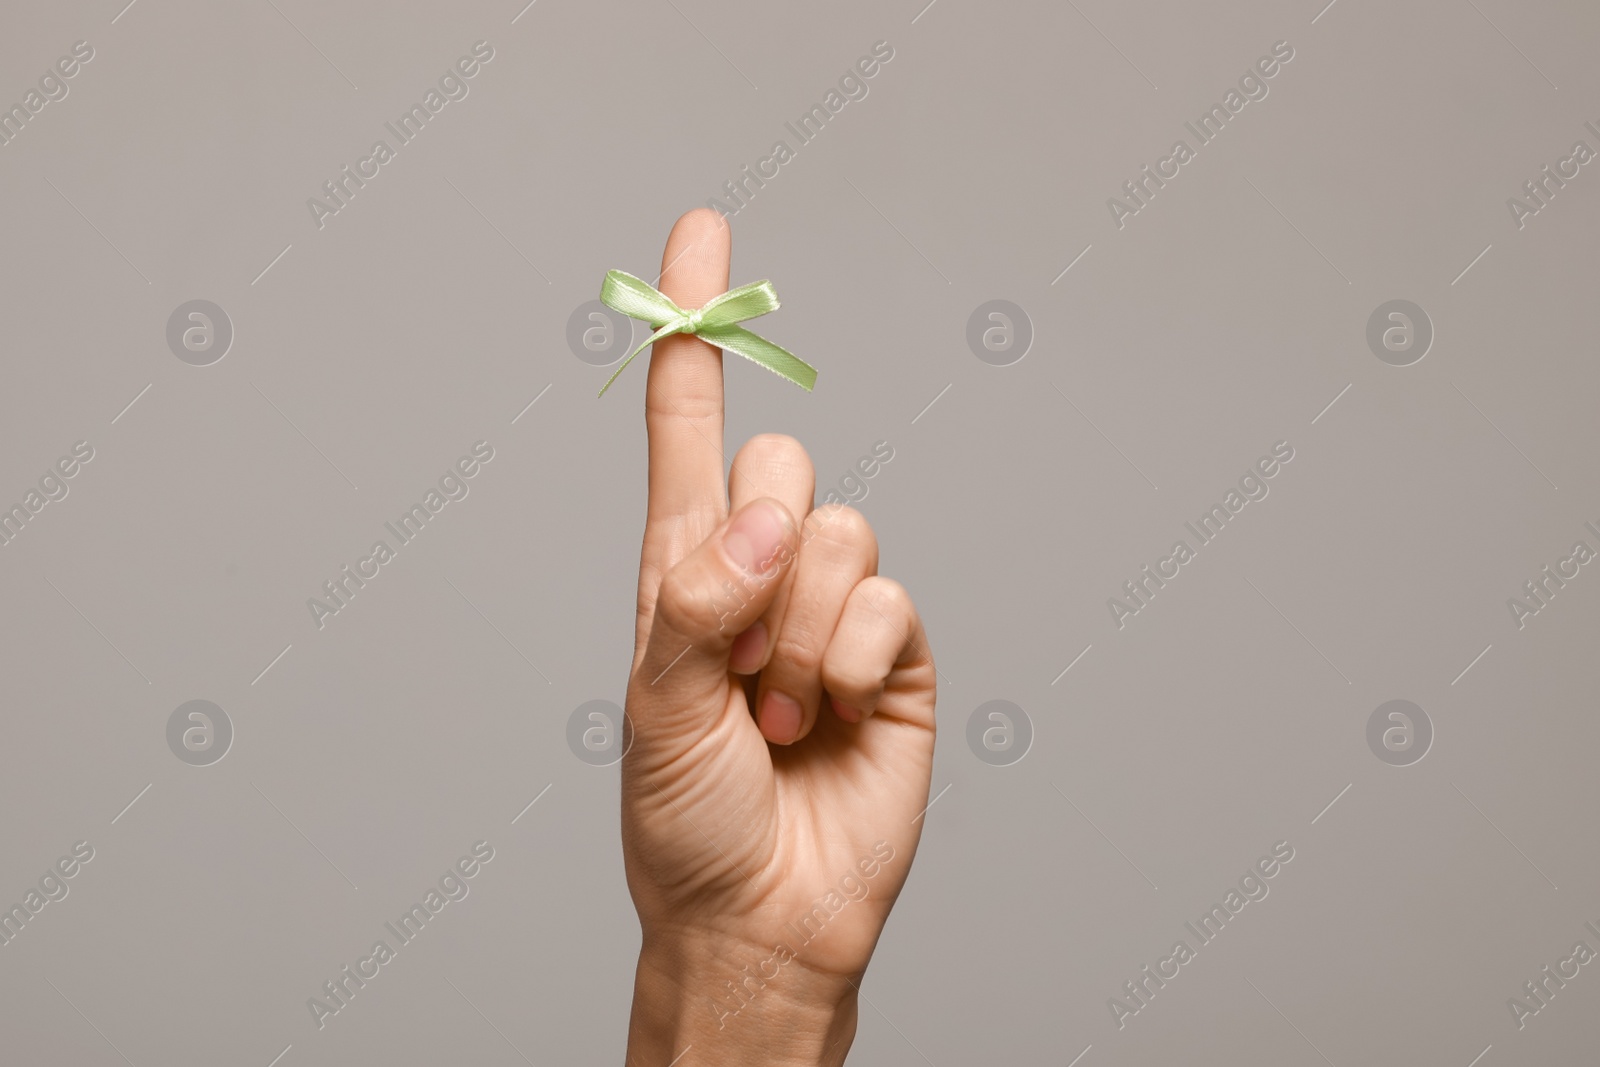 Photo of Woman showing index finger with tied bow as reminder on grey background, closeup